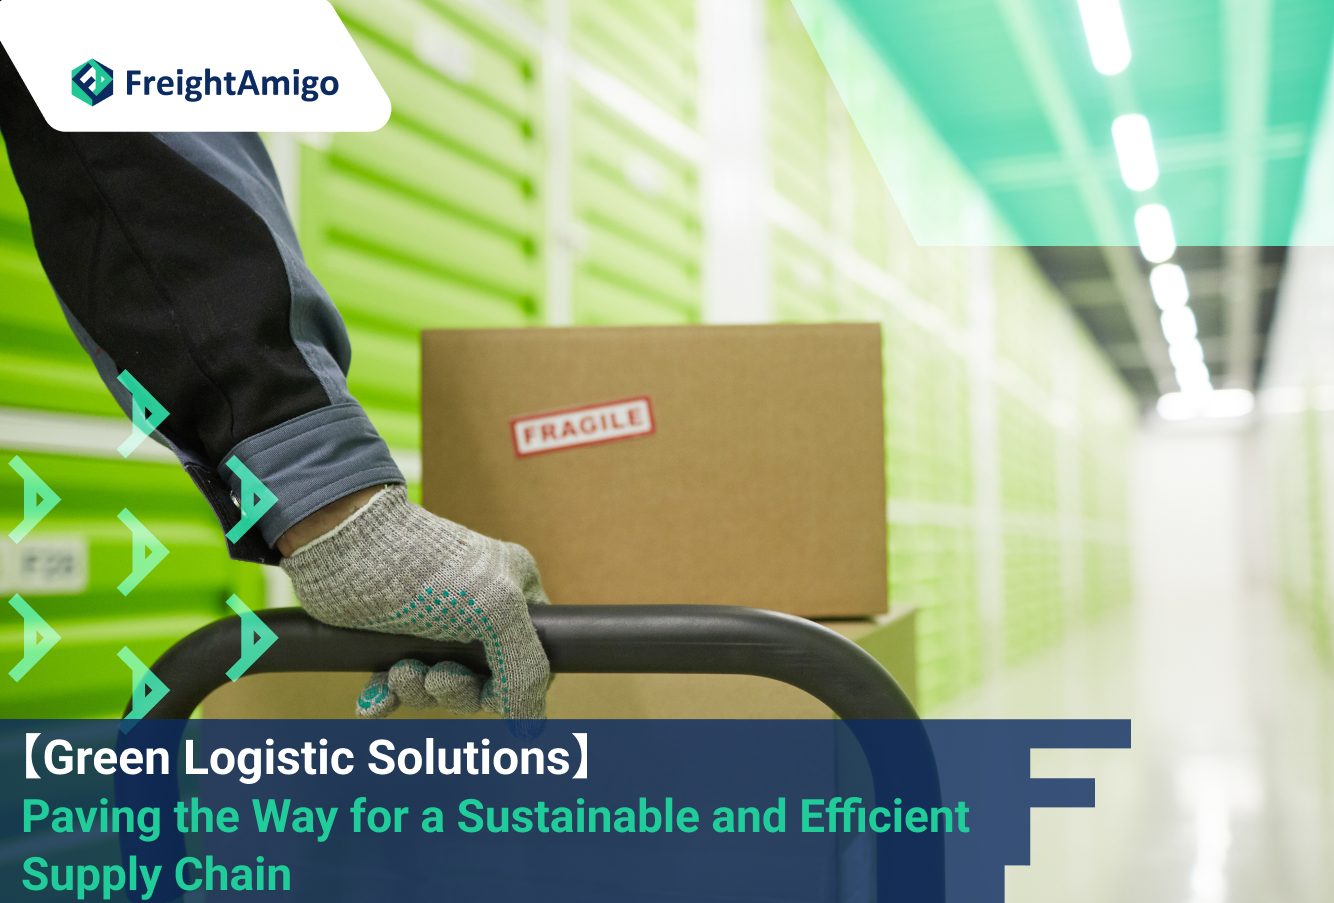 Green Logistic Solutions: Paving the Way for a Sustainable and Efficient Supply Chain